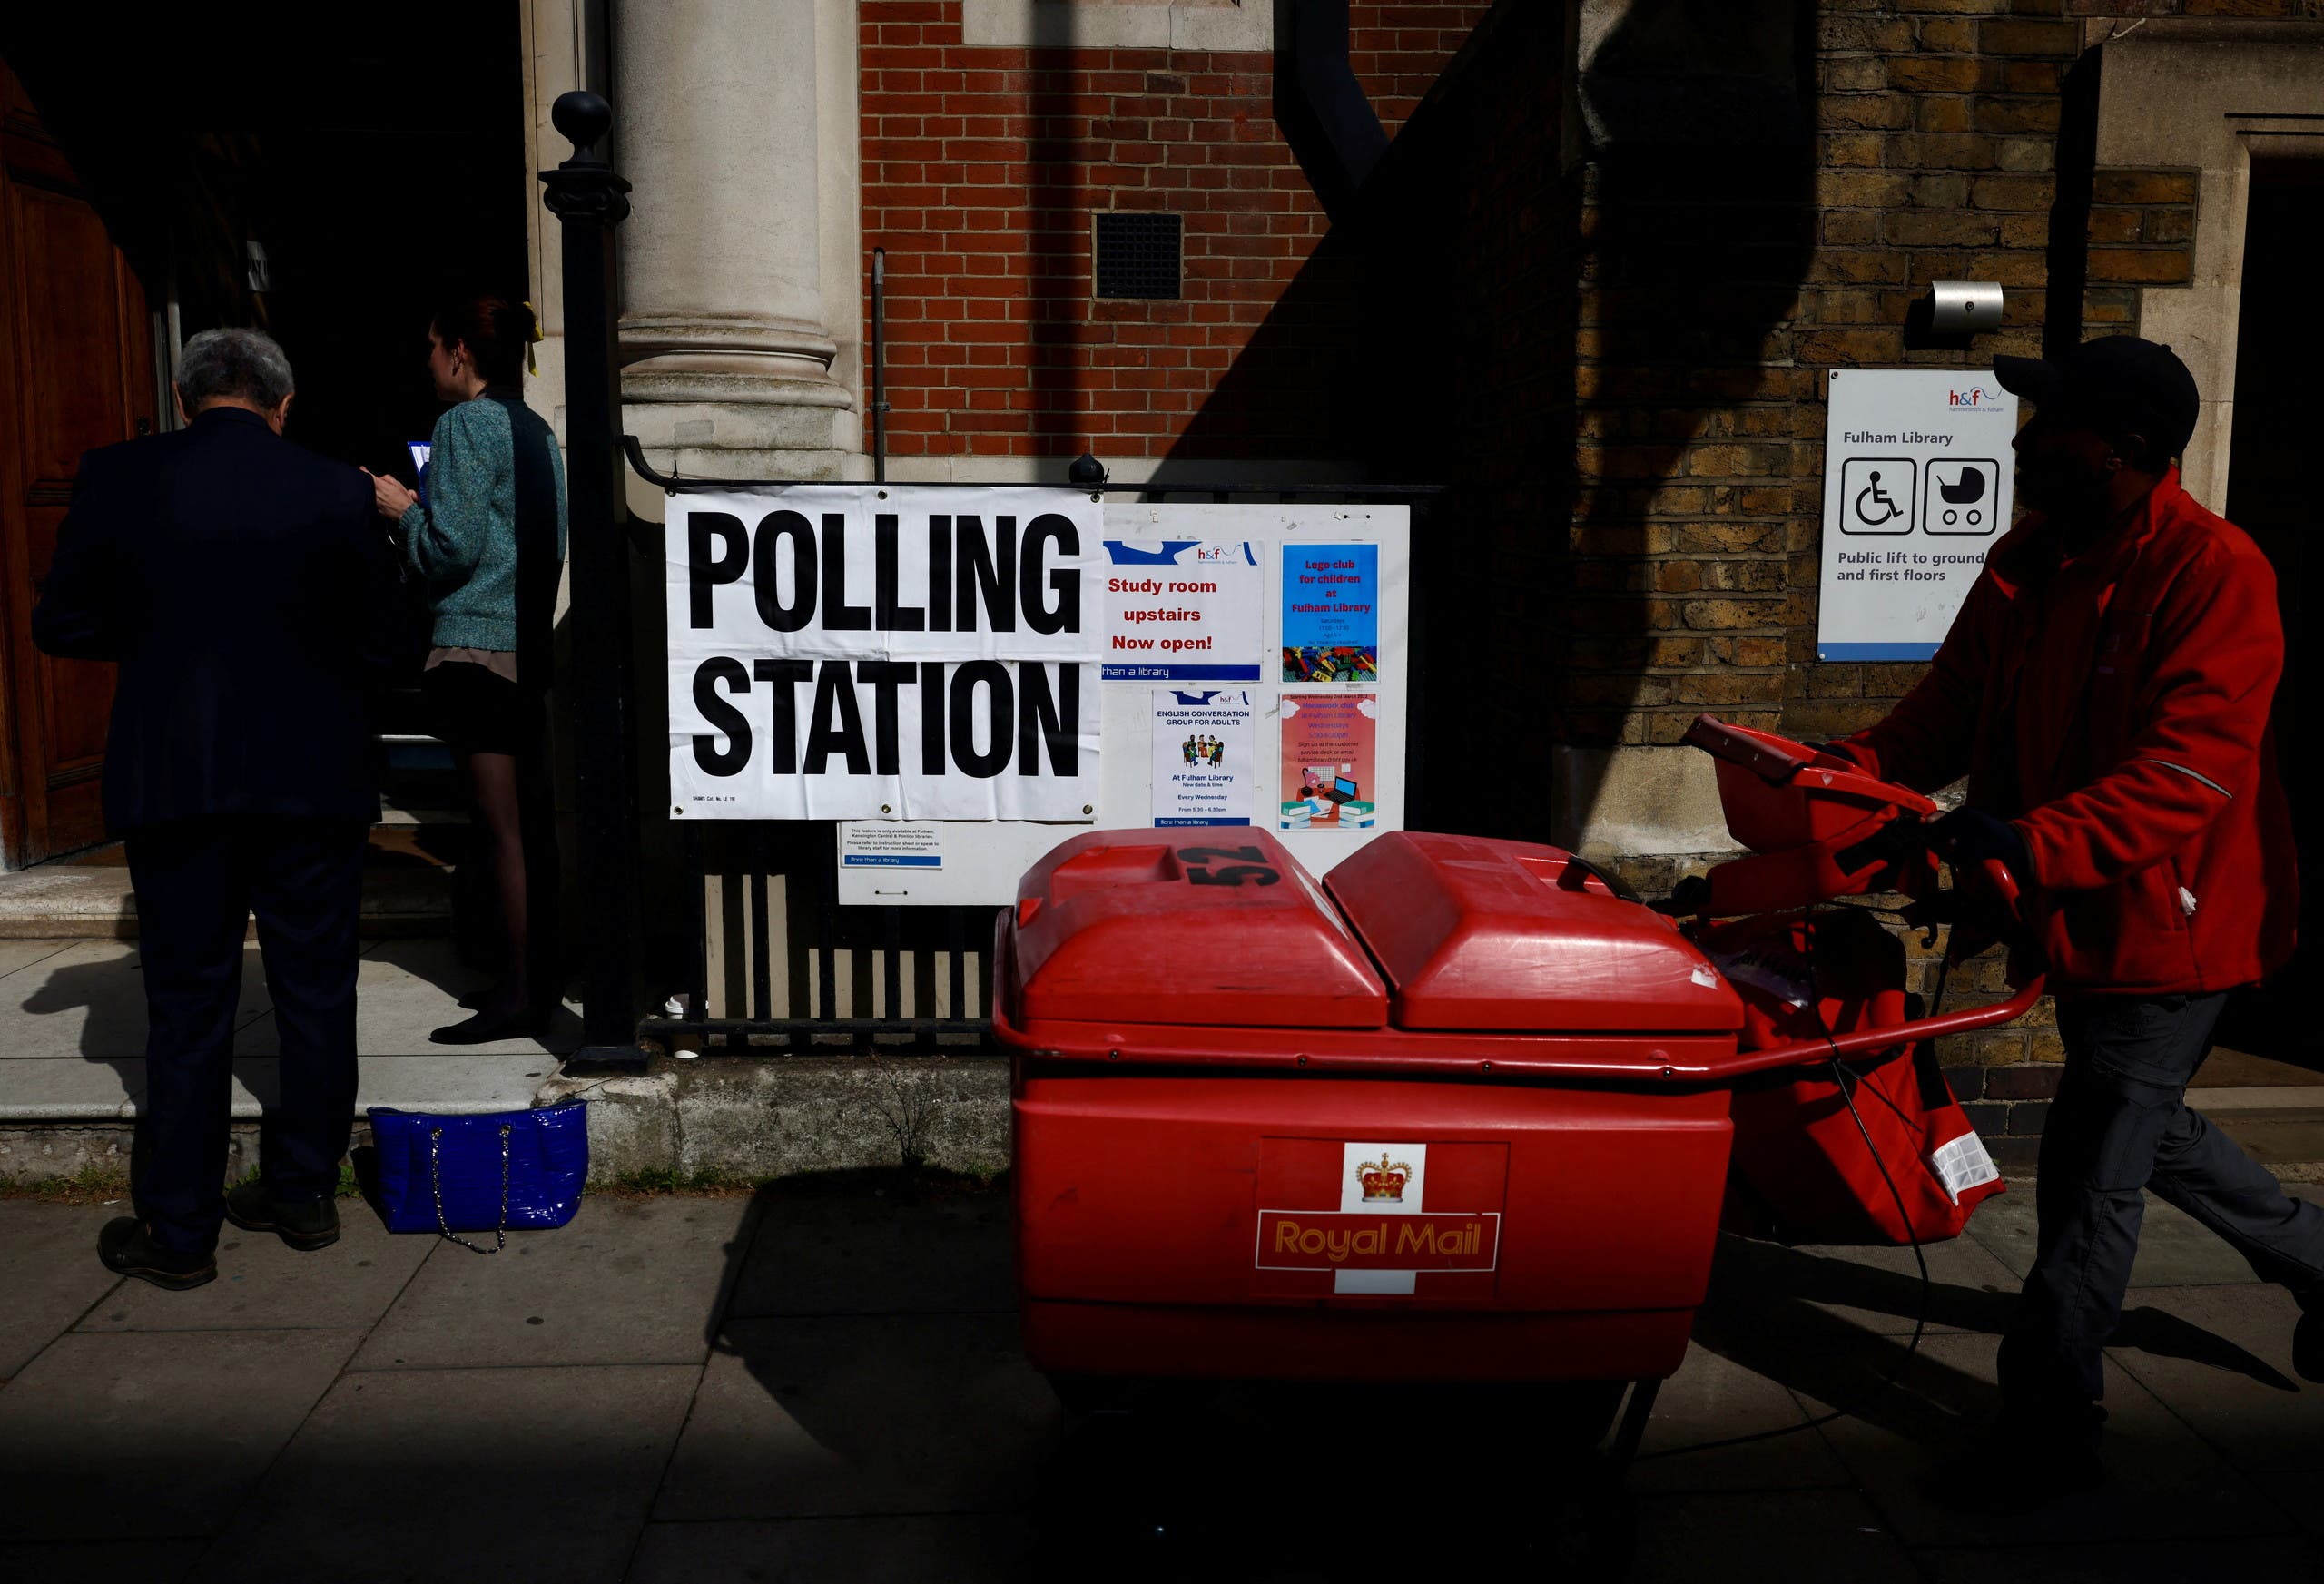 In front of a polling station in London